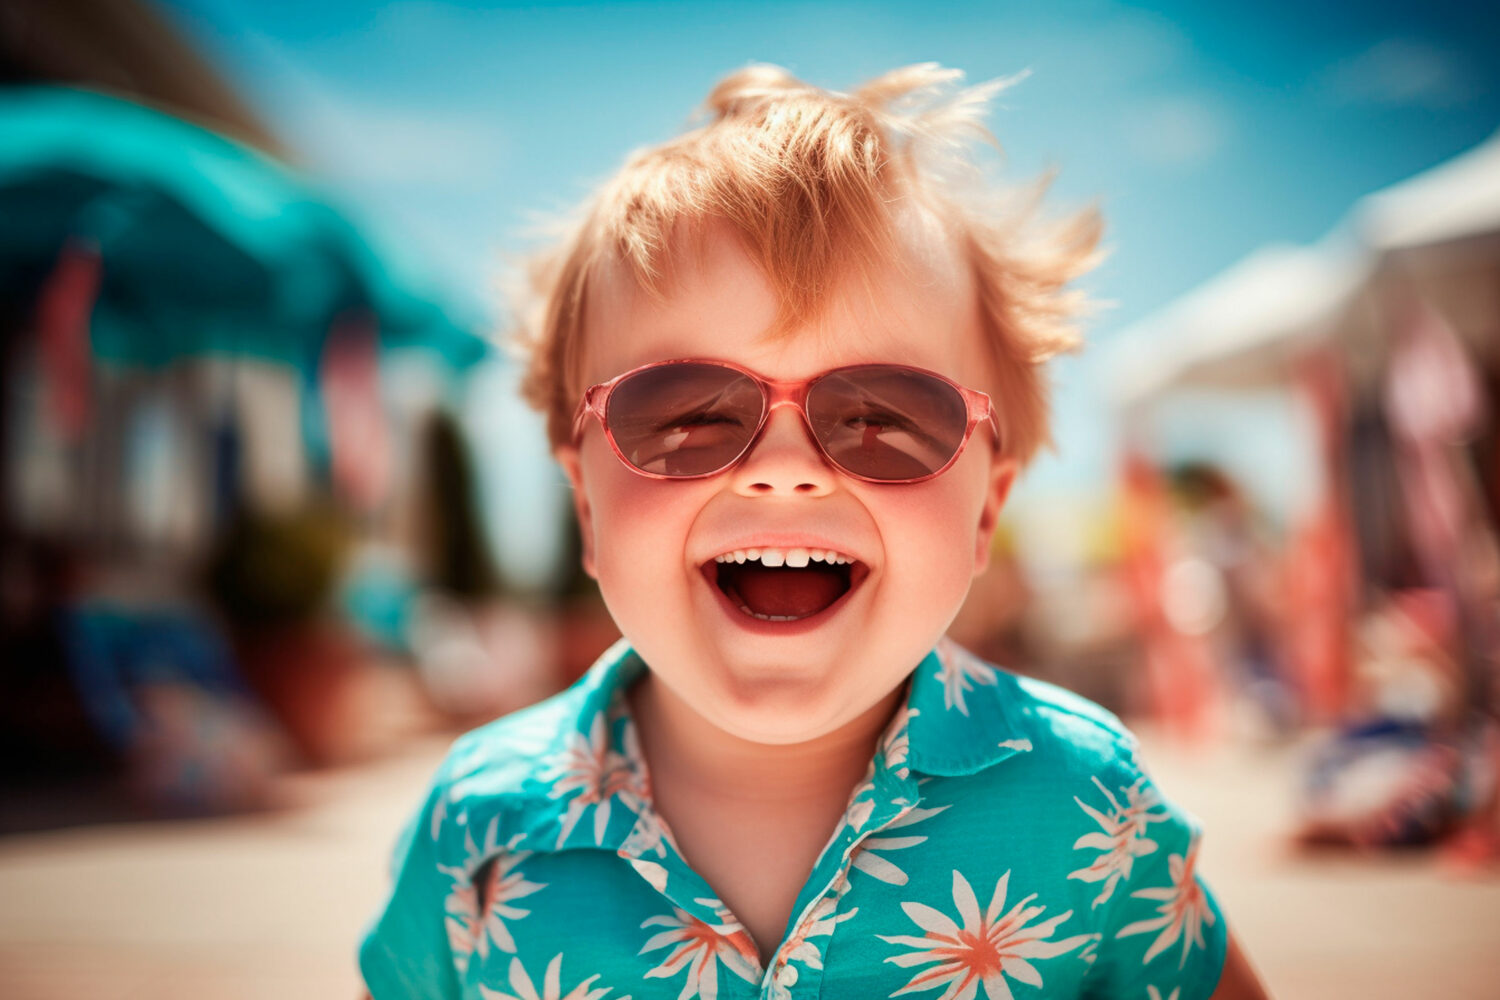 blonde haired boy with Down syndrome wearing turquoise Hawaiian print shirt and red sunglasses grins on a hot sunny day